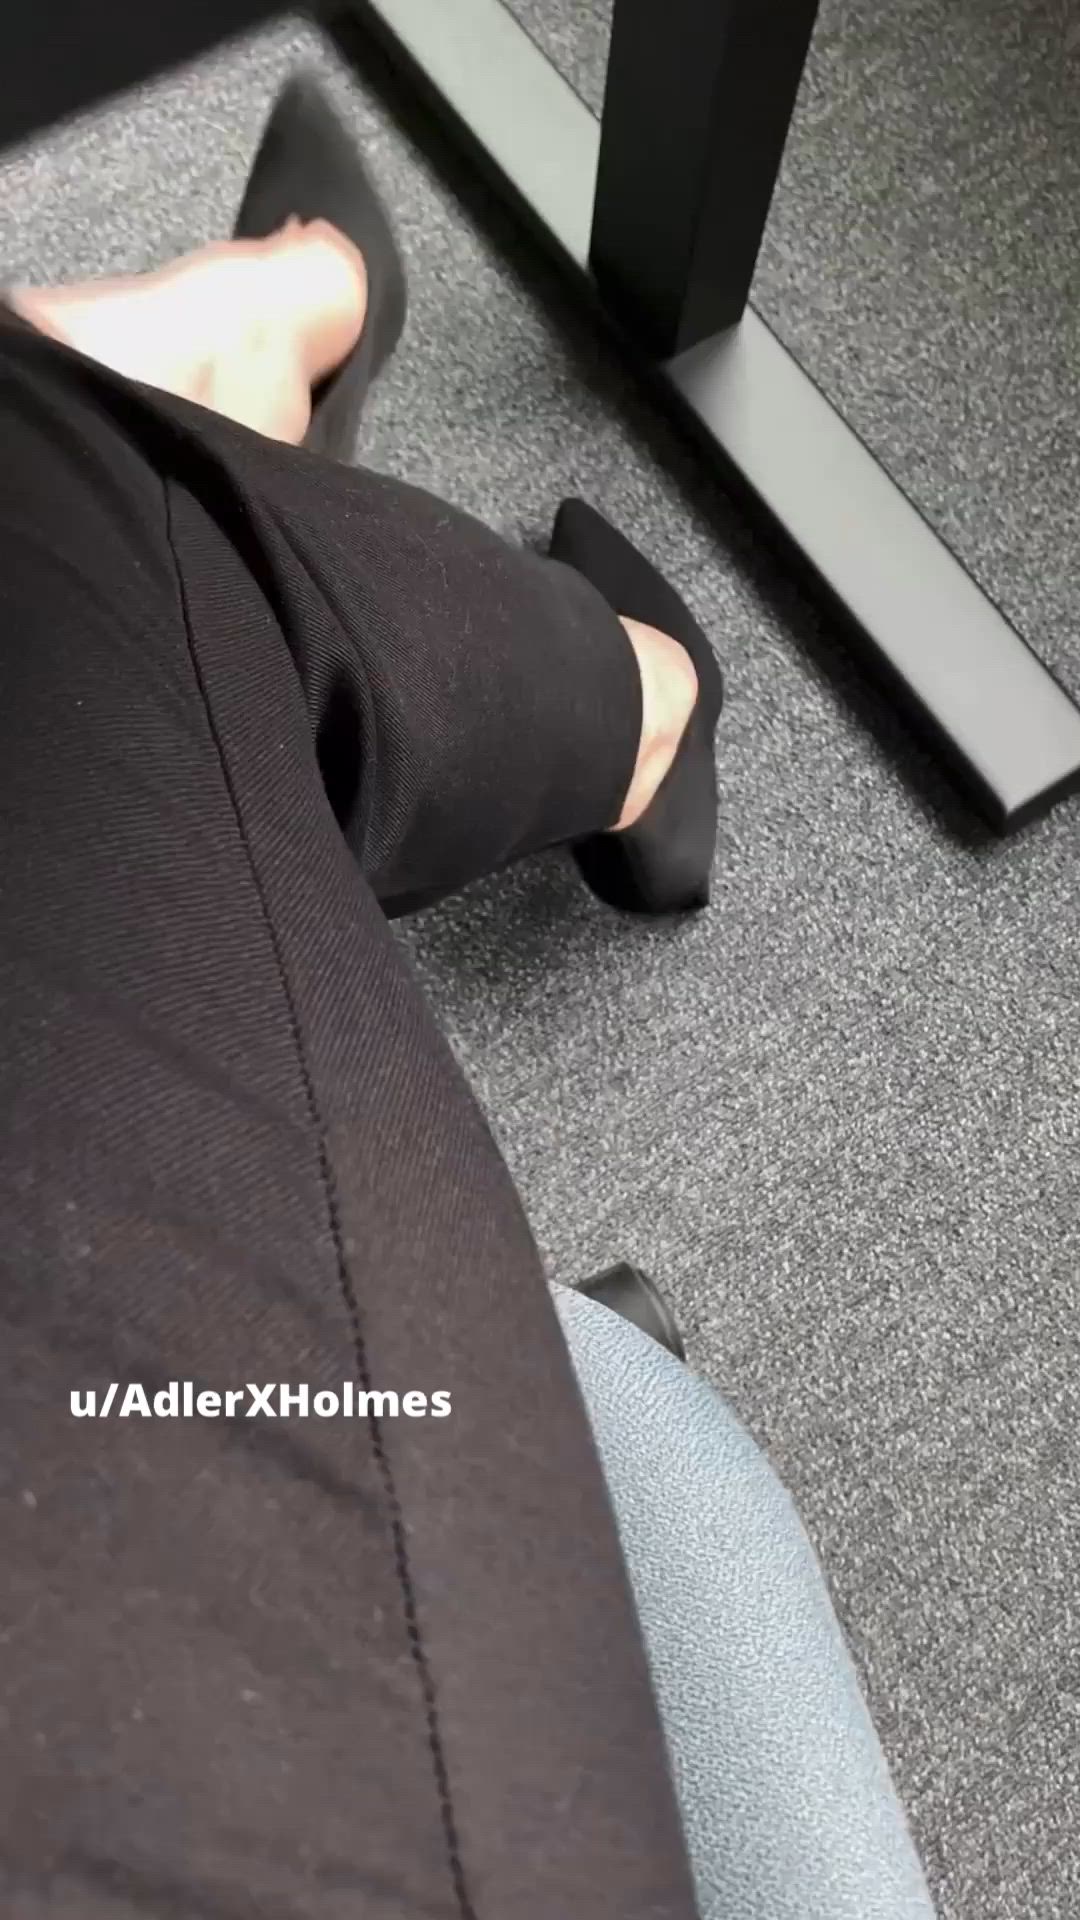 Amateur porn video with onlyfans model adlerxholmes <strong>@adlerxholmes</strong>